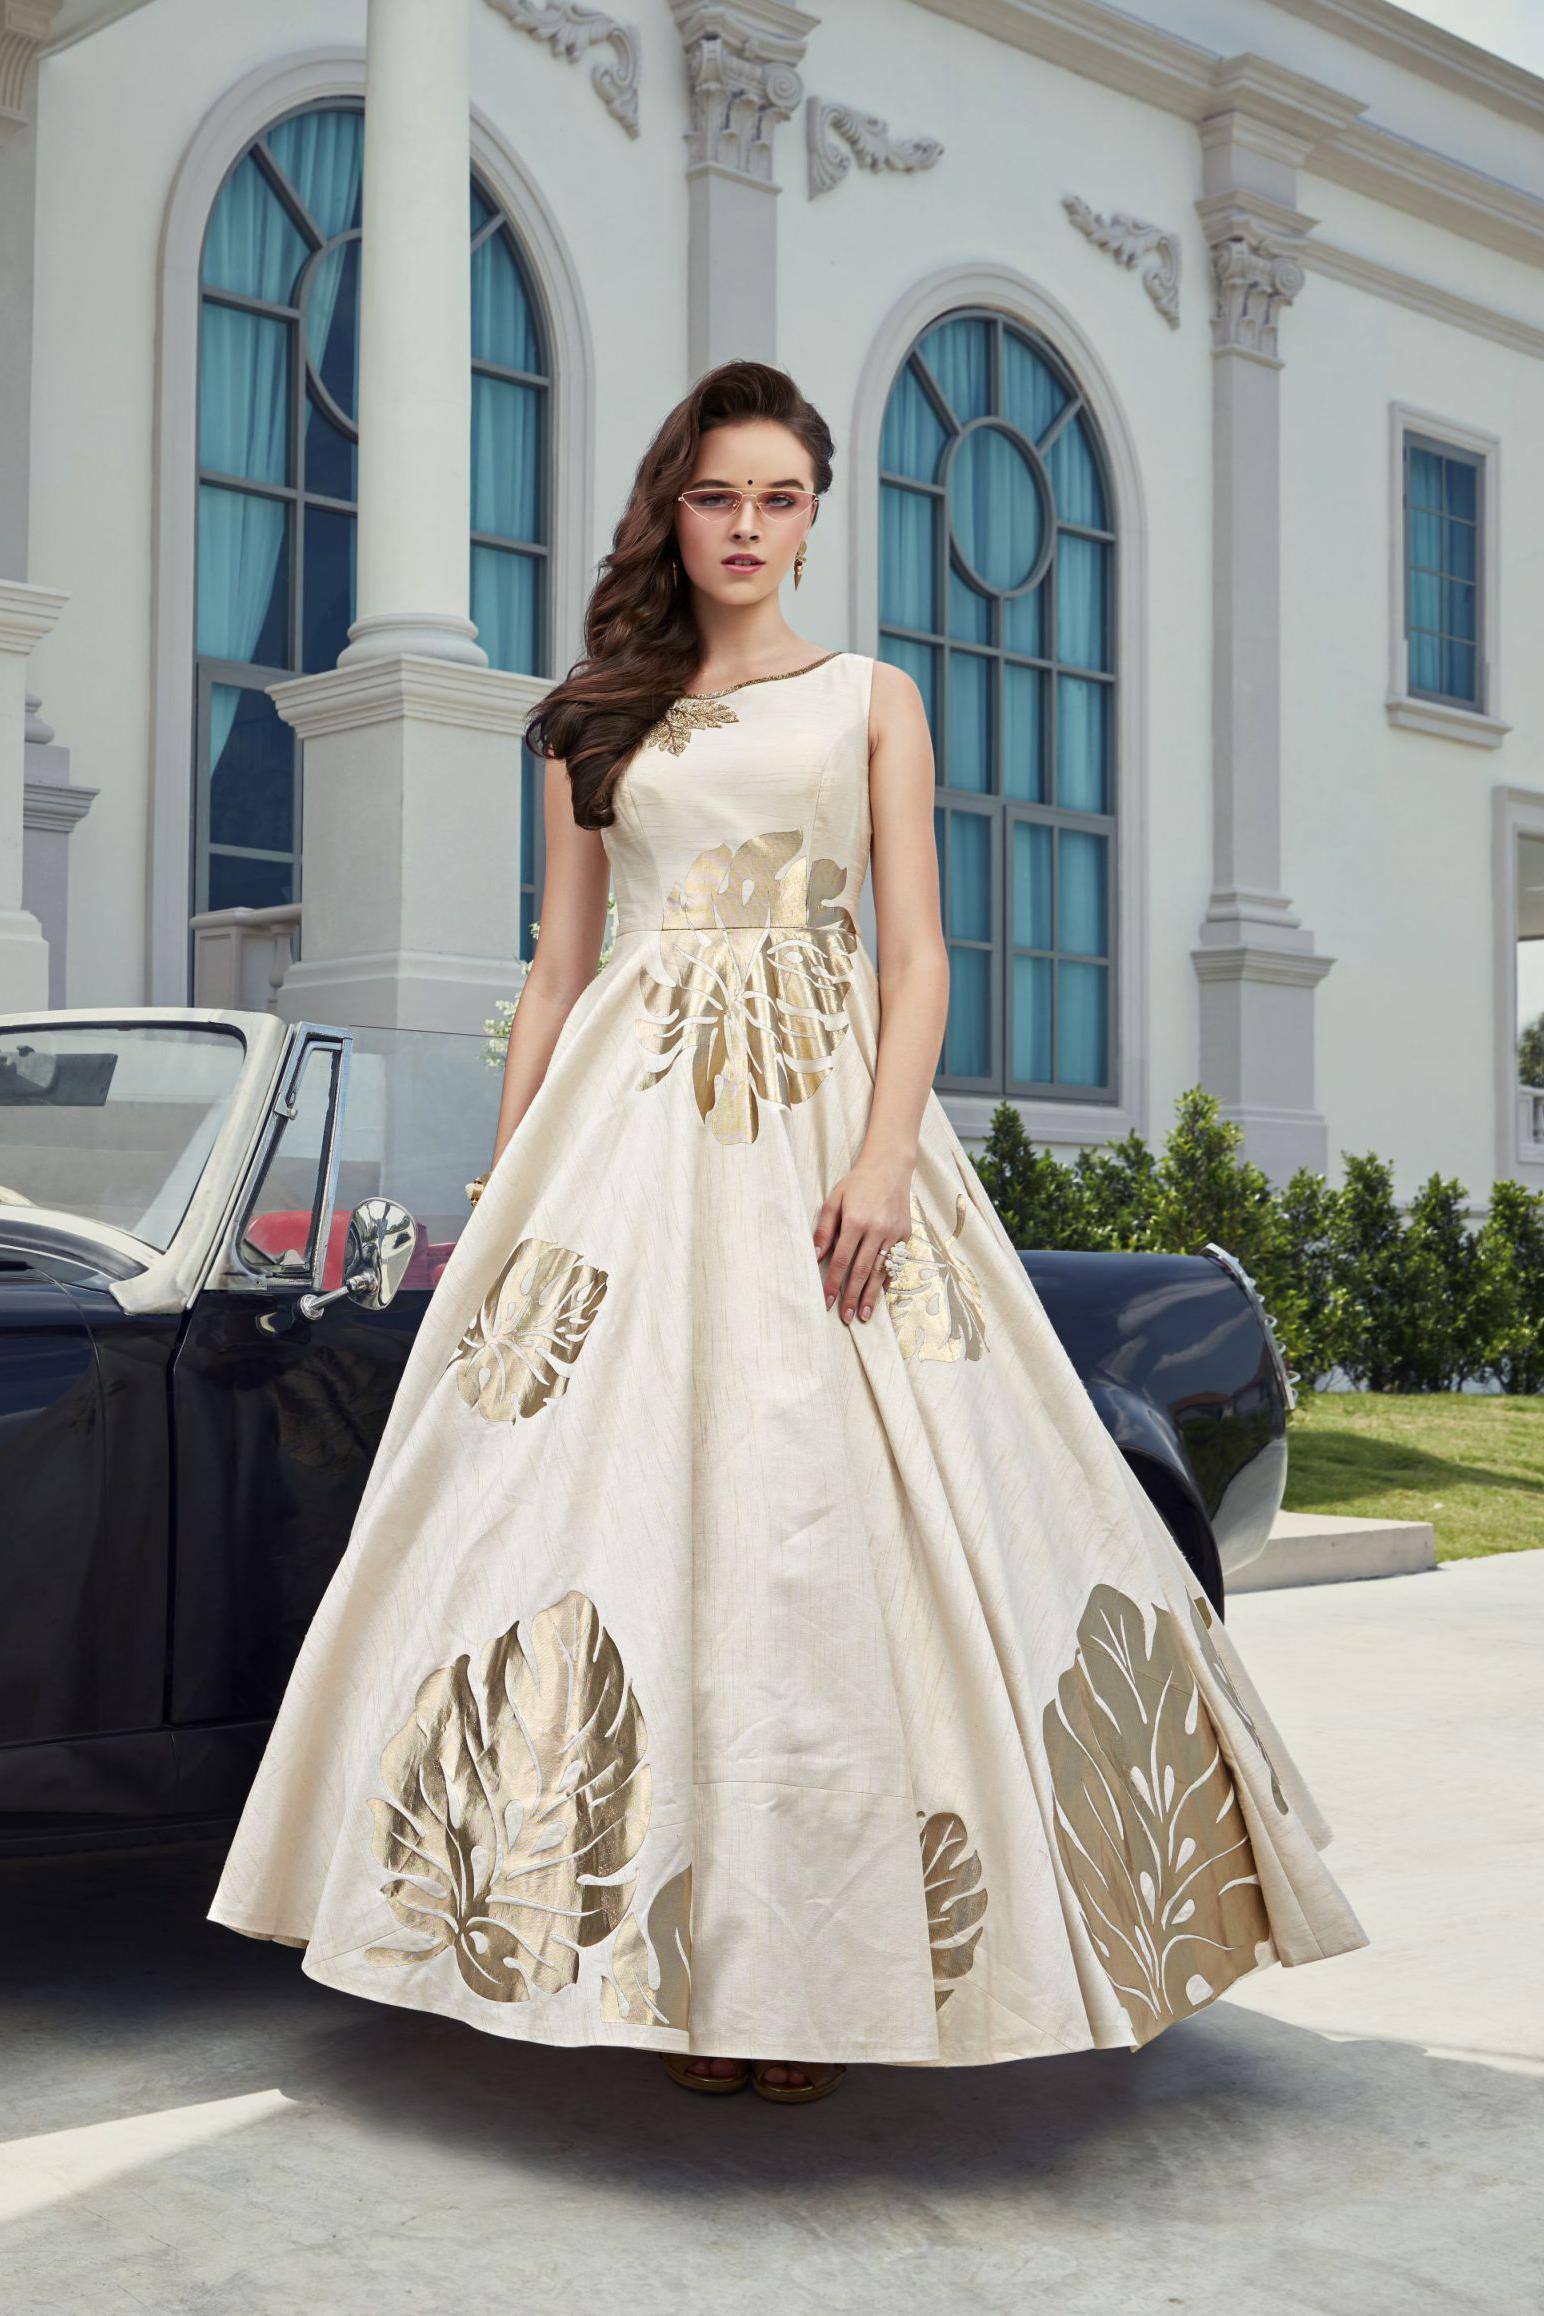 White Christian Style Bridal Dress Gown TH58